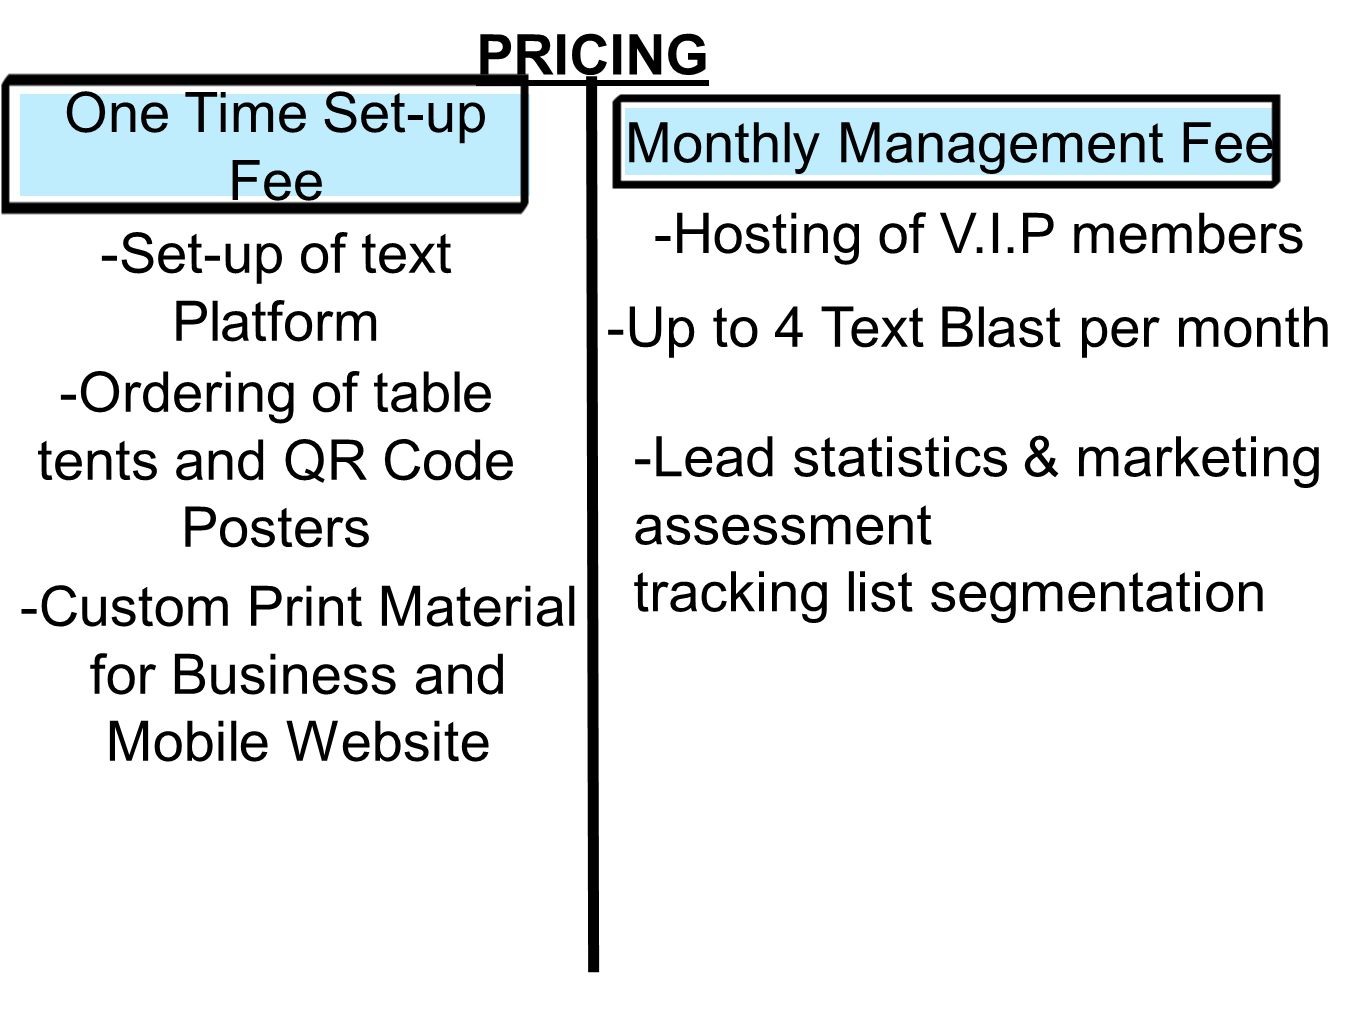 PRICING One Time Set-up Fee Monthly Management Fee -Ordering of table tents and QR Code Posters -Set-up of text Platform -Custom Print Material for Business and Mobile Website -Hosting of V.I.P members -Up to 4 Text Blast per month -Lead statistics & marketing assessment tracking list segmentation